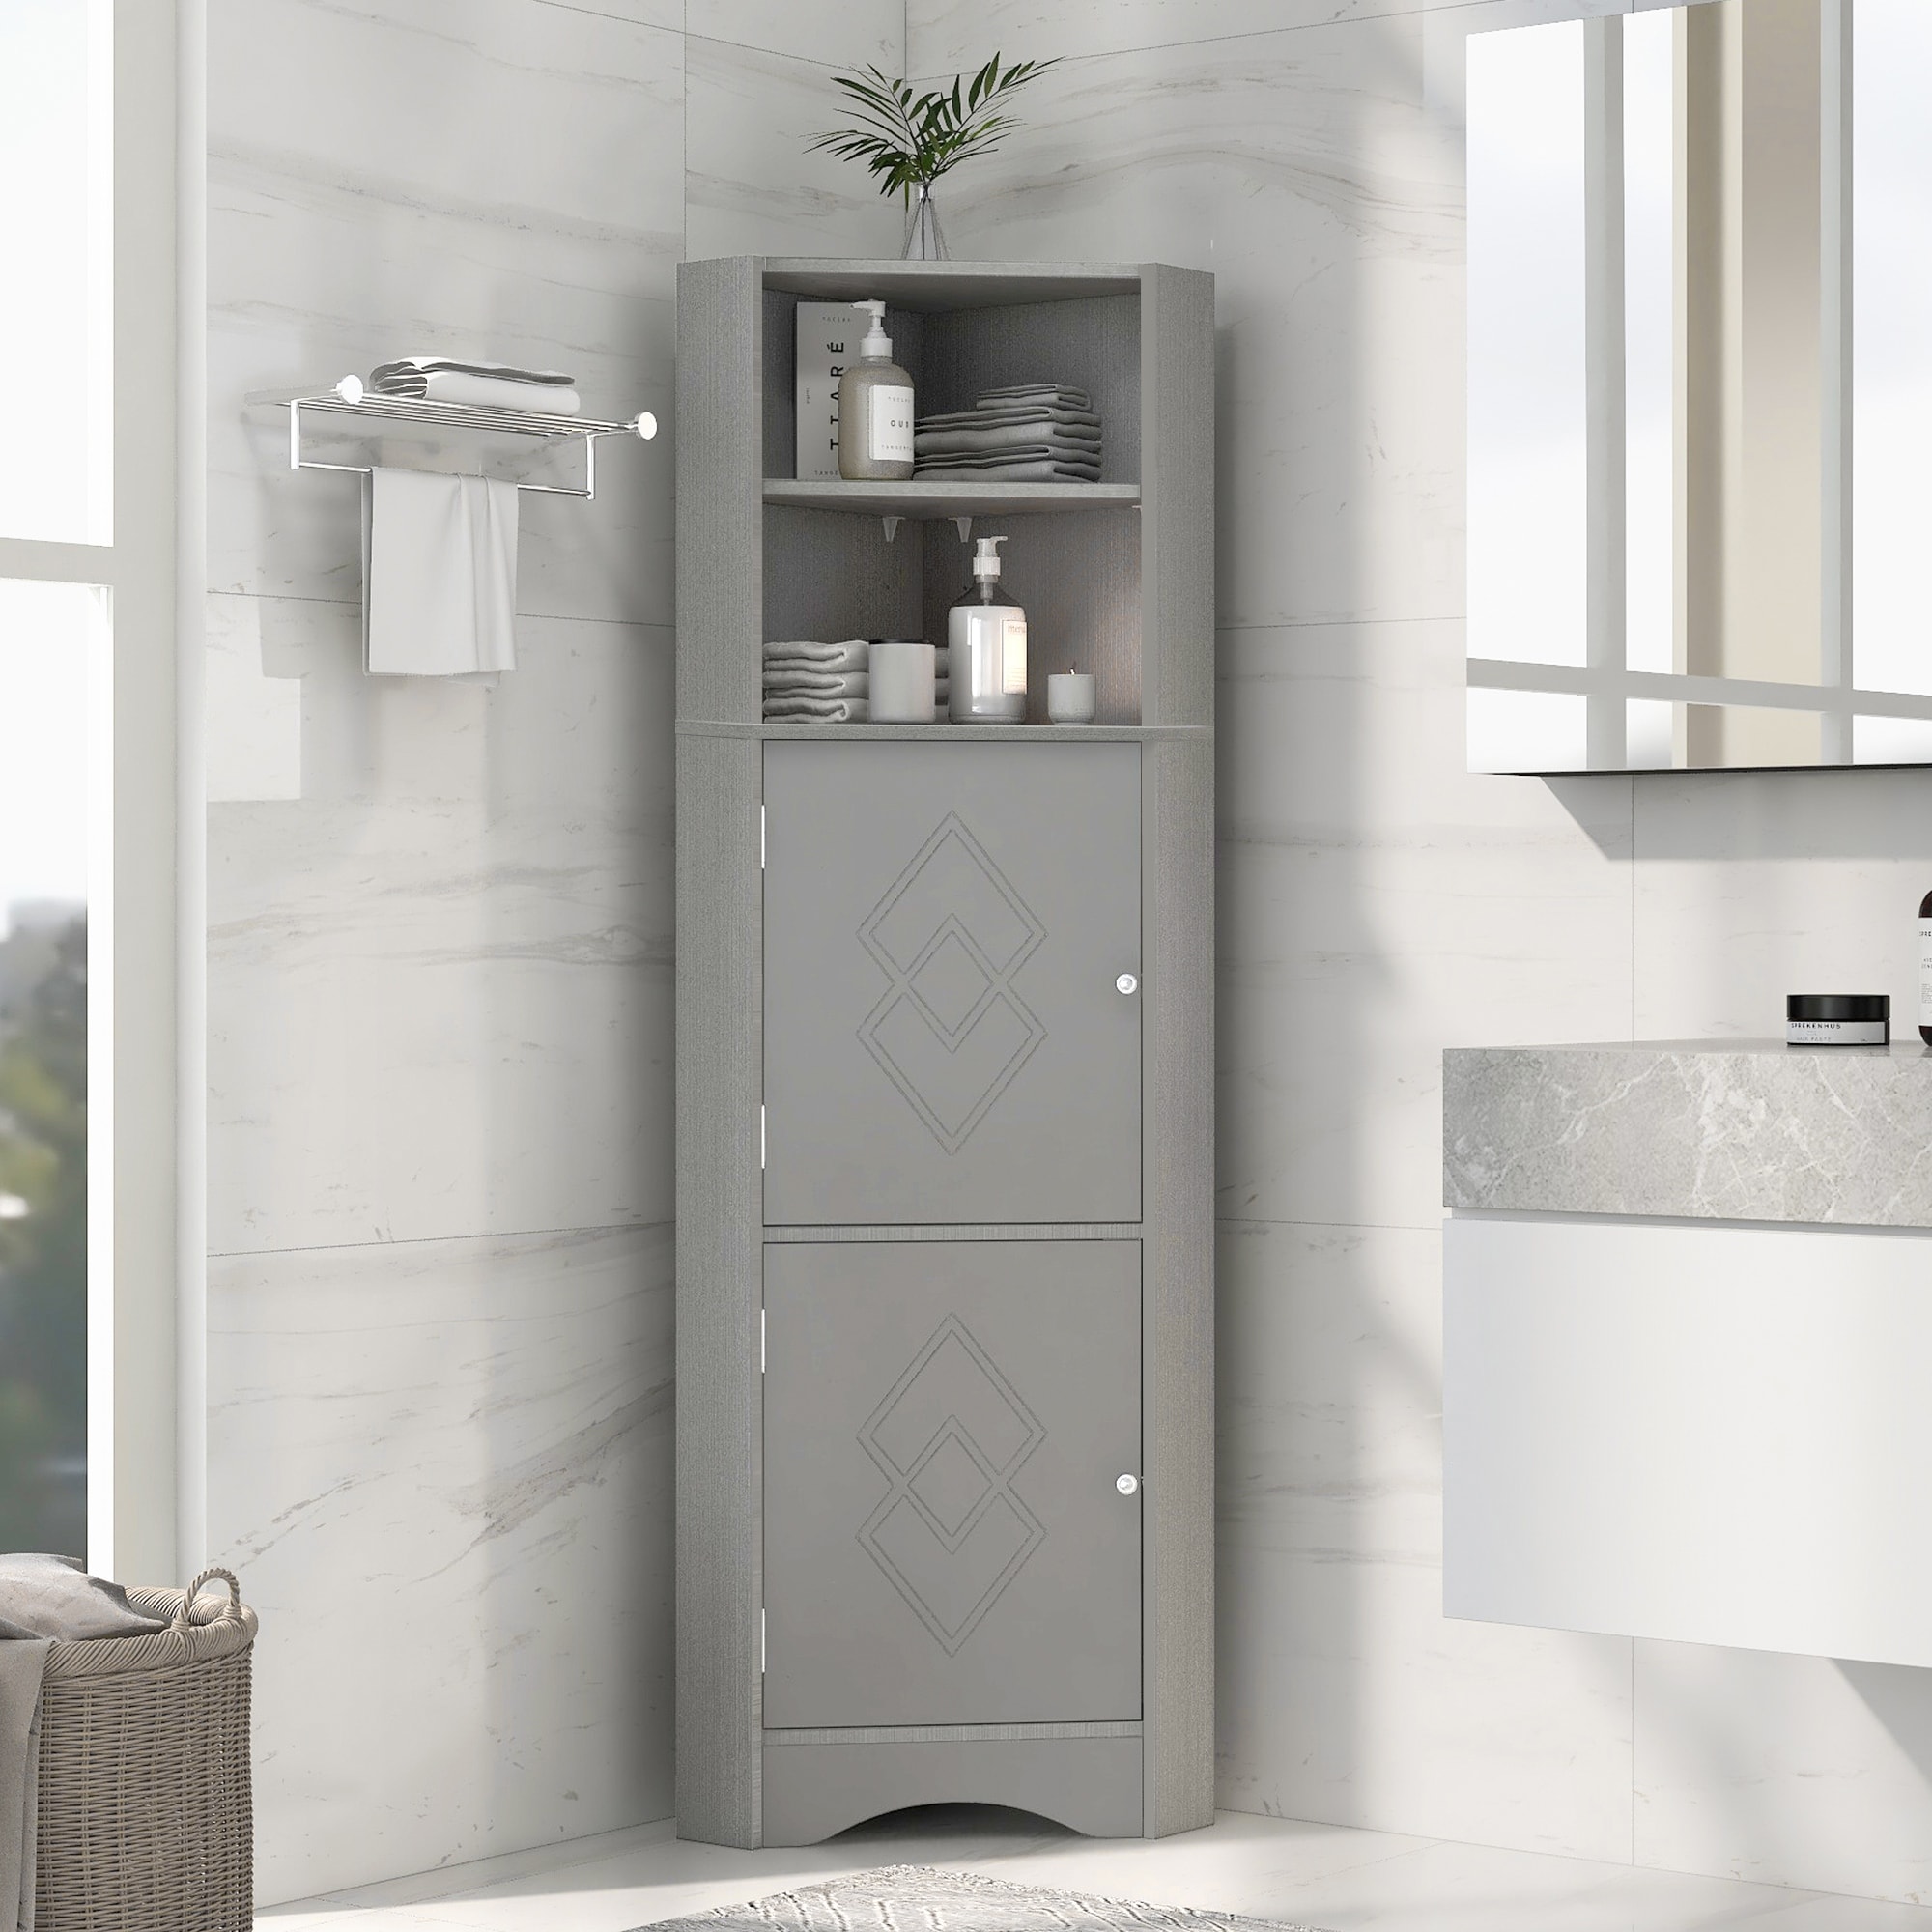 https://ak1.ostkcdn.com/images/products/is/images/direct/95459e1e7b0d6030f2cd6cf6a2622be8f6c727cc/Bathroom-Tall-Corner-Cabinet-with-Doors-and-Adjustable-Shelves%2CGrey.jpg